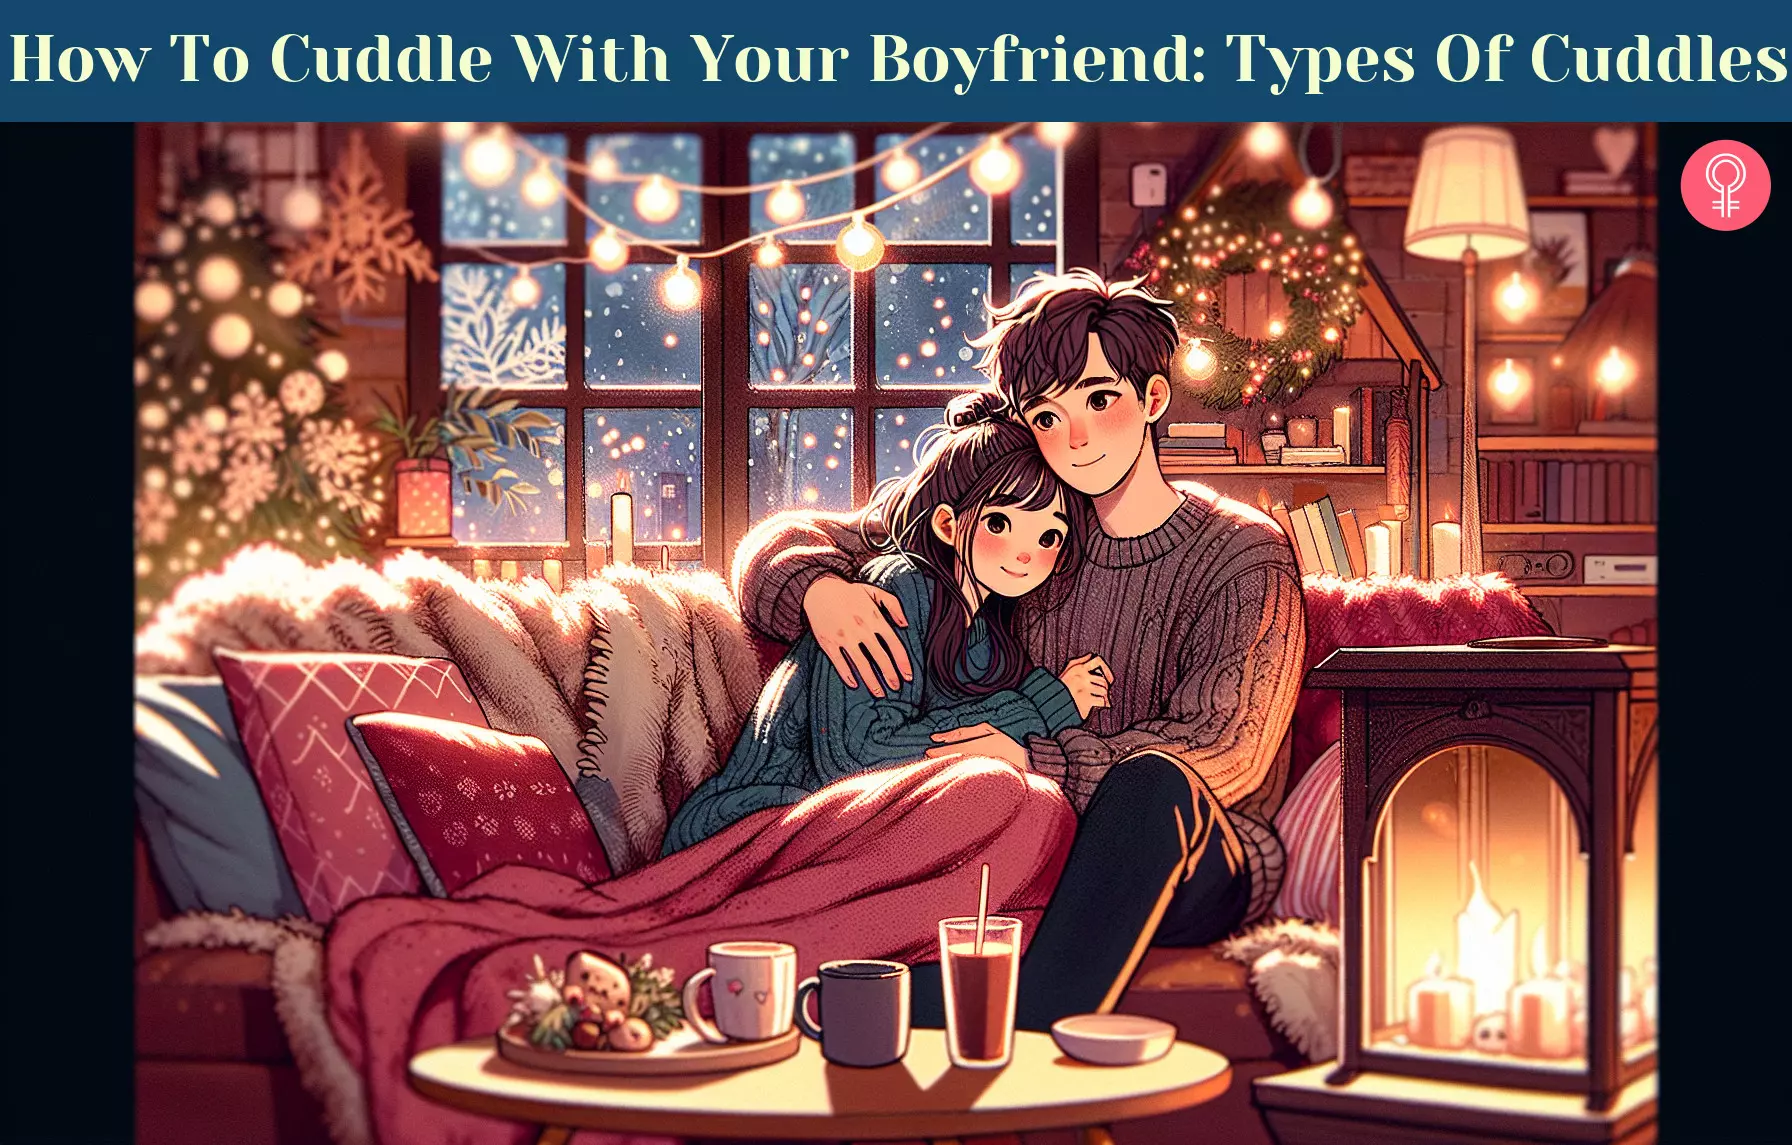 How To Cuddle With Your Boyfriend_illustration